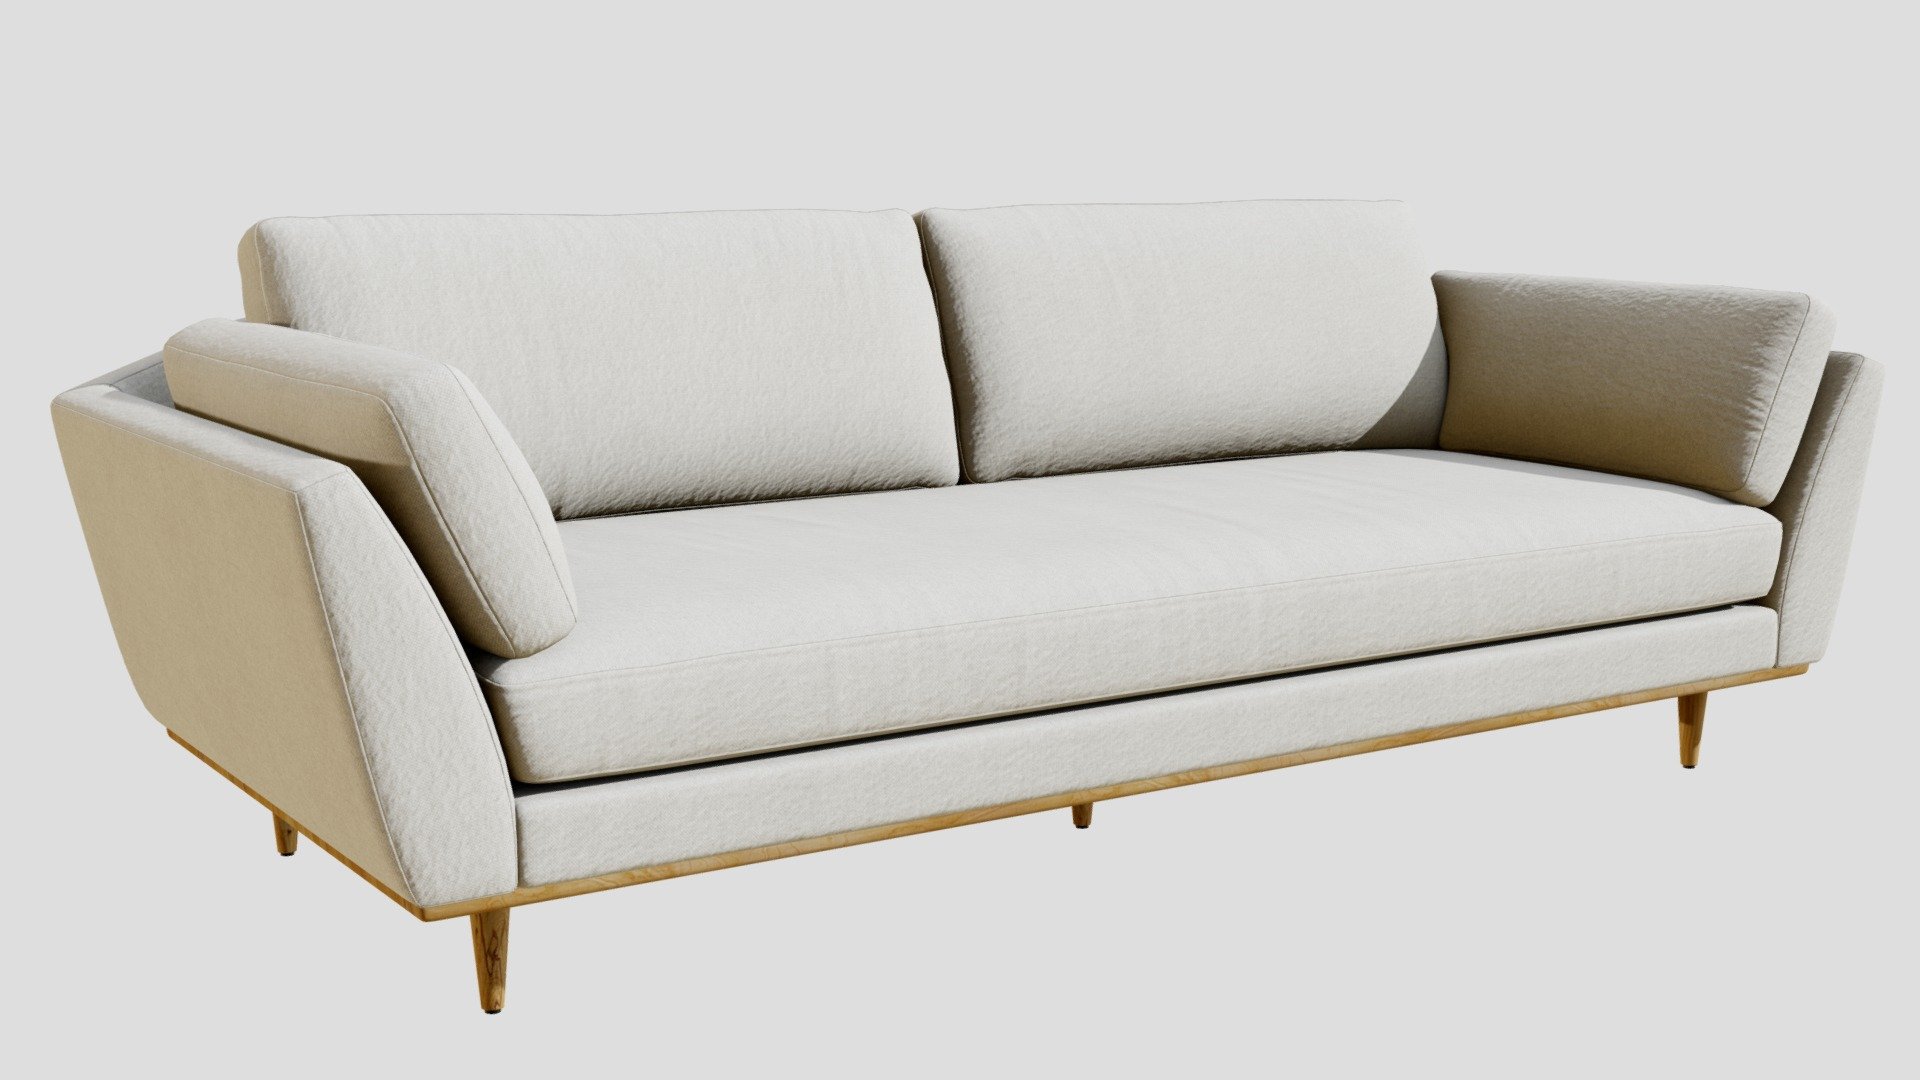 High-quality 3d model of a Crate and Barrel Hague Mid-Century Sofa

Original: https://www.crateandbarrel.com/hague-mid-century-sofa/s411953

18592 polygons
18698 vertices - Armchair_hague - Buy Royalty Free 3D model by 3detto 3d model